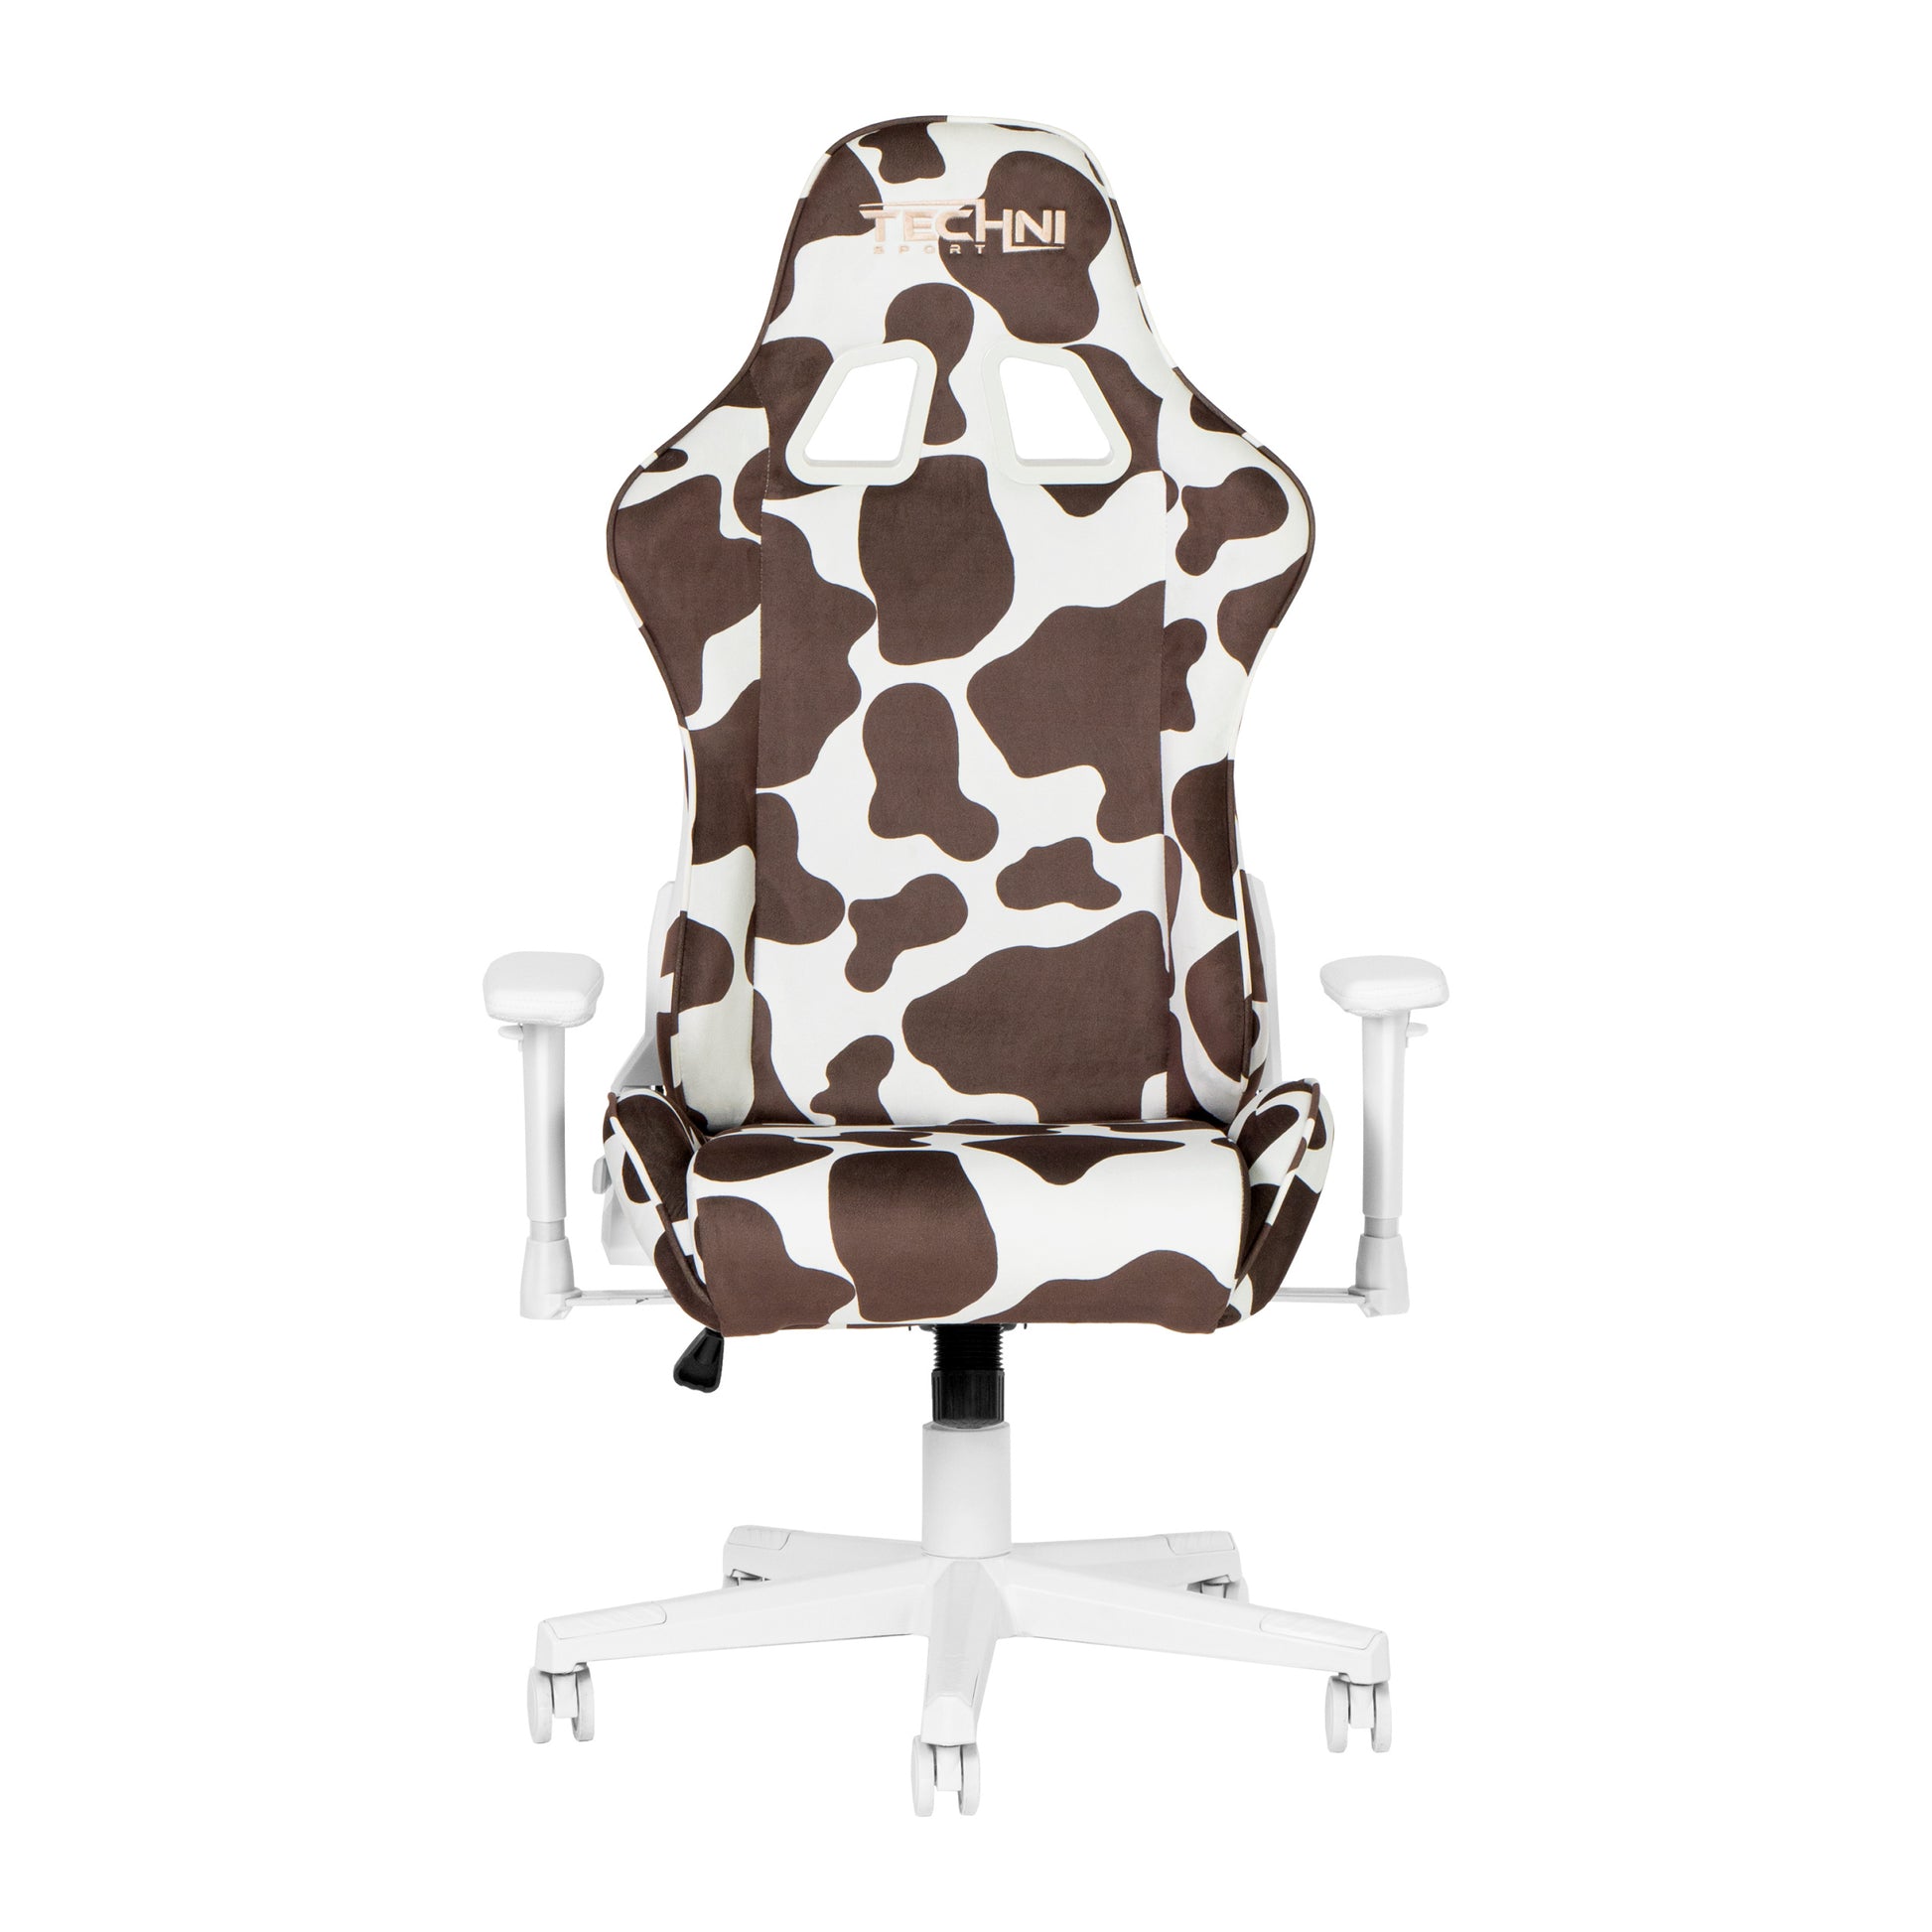 Techni Sport Ts85 Brown Cow Series Gaming Chair -